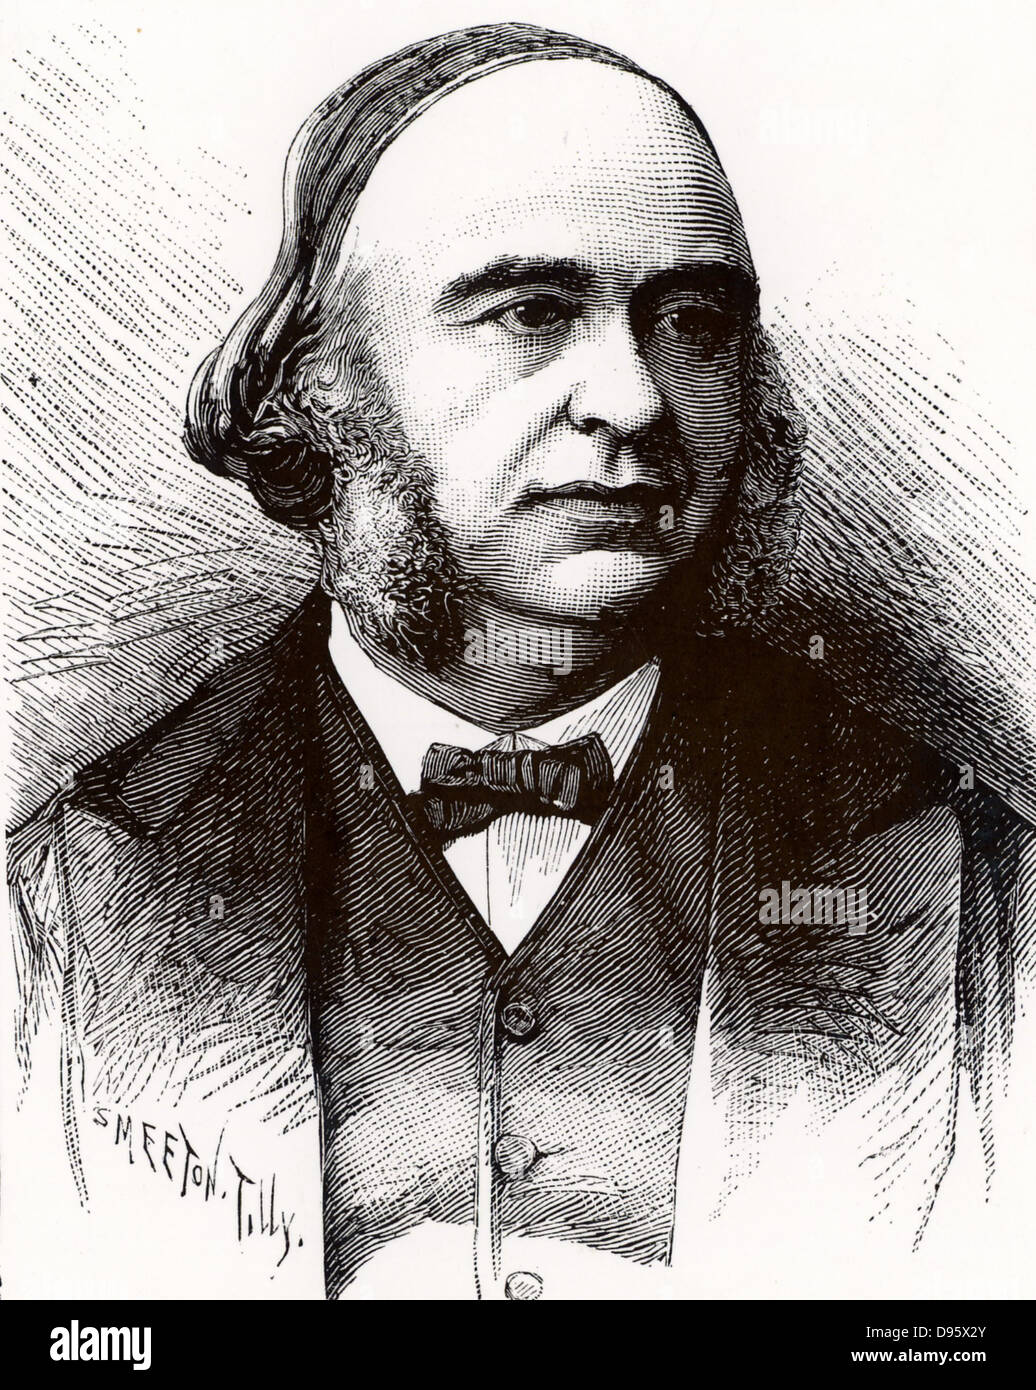 Paul Broca (1824-1880) French physician, anatomist and anthropologist.  Discovered the location of the speech production area in the front lobes of the brain. Engraving from 'La Nature' (Paris, 1880). Stock Photo